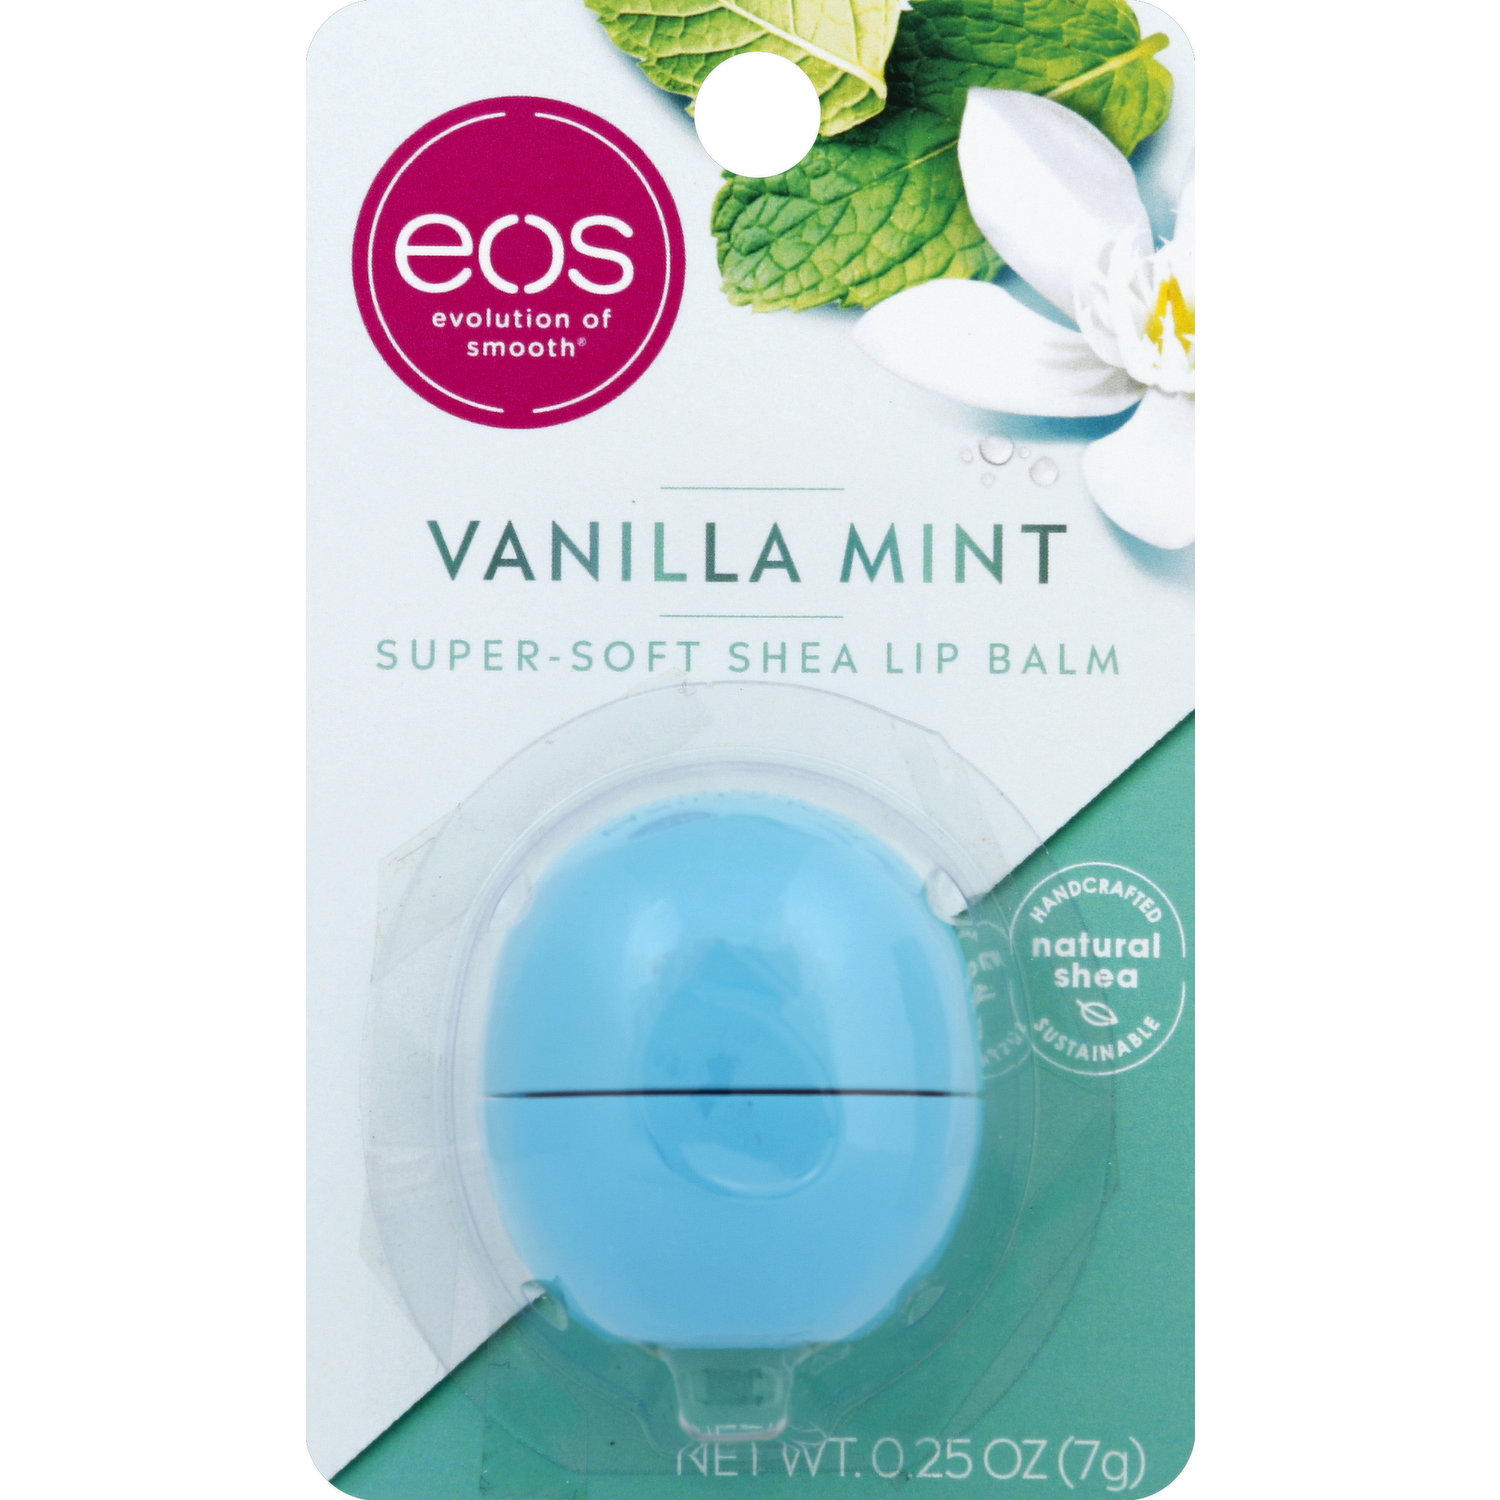 eos 100% Natural & Organic Lip Balm- Strawberry Sorbet, All-Day Moisture,  Dermatologist Recommended for Sensitive Skin, Lip Care Products, 0.25 oz